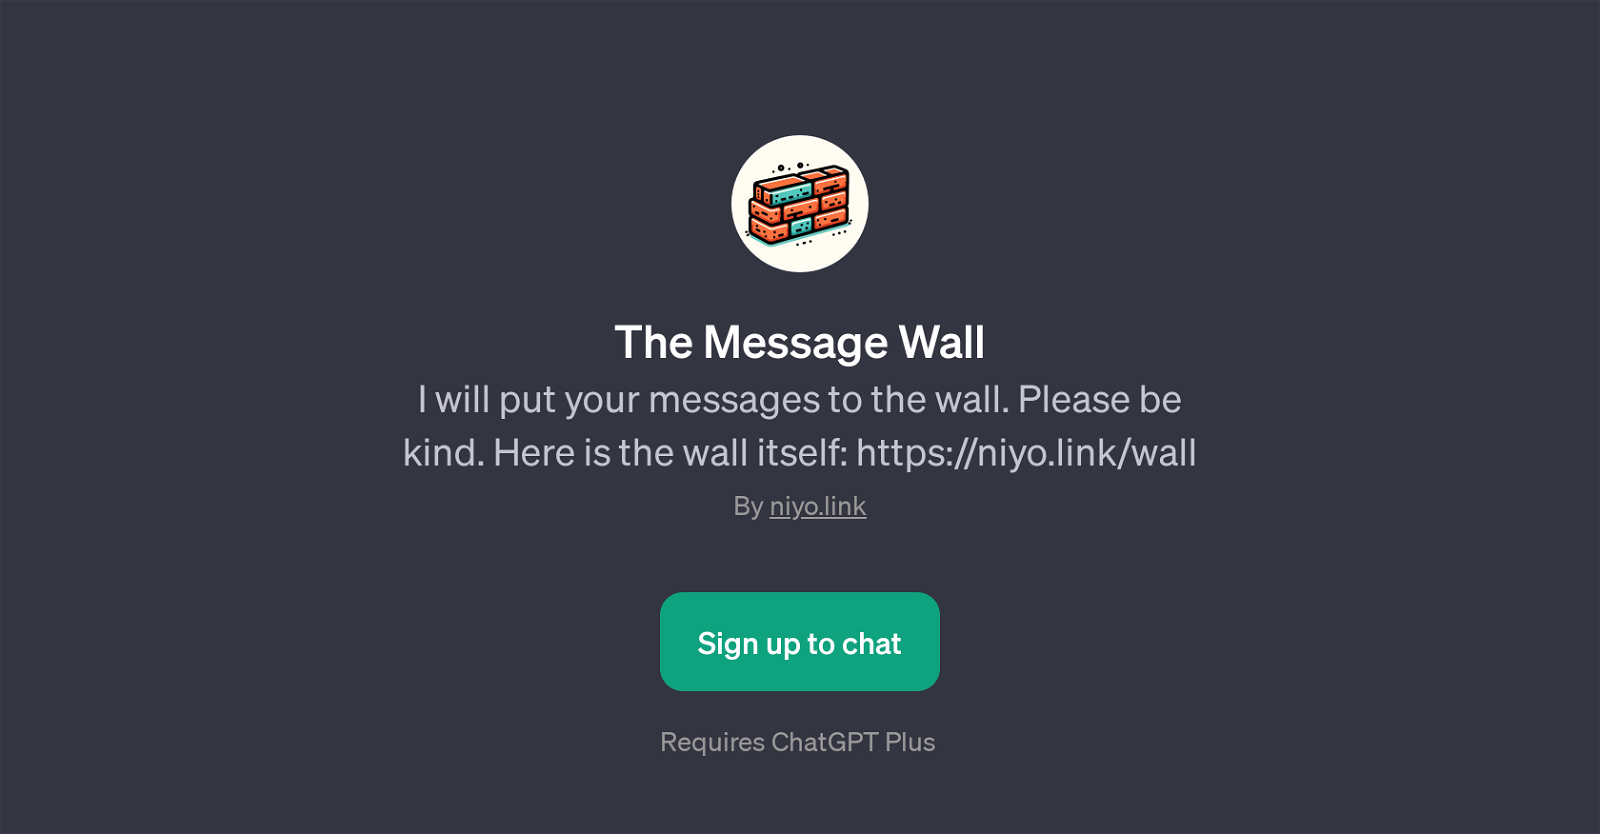 The Message Wall website